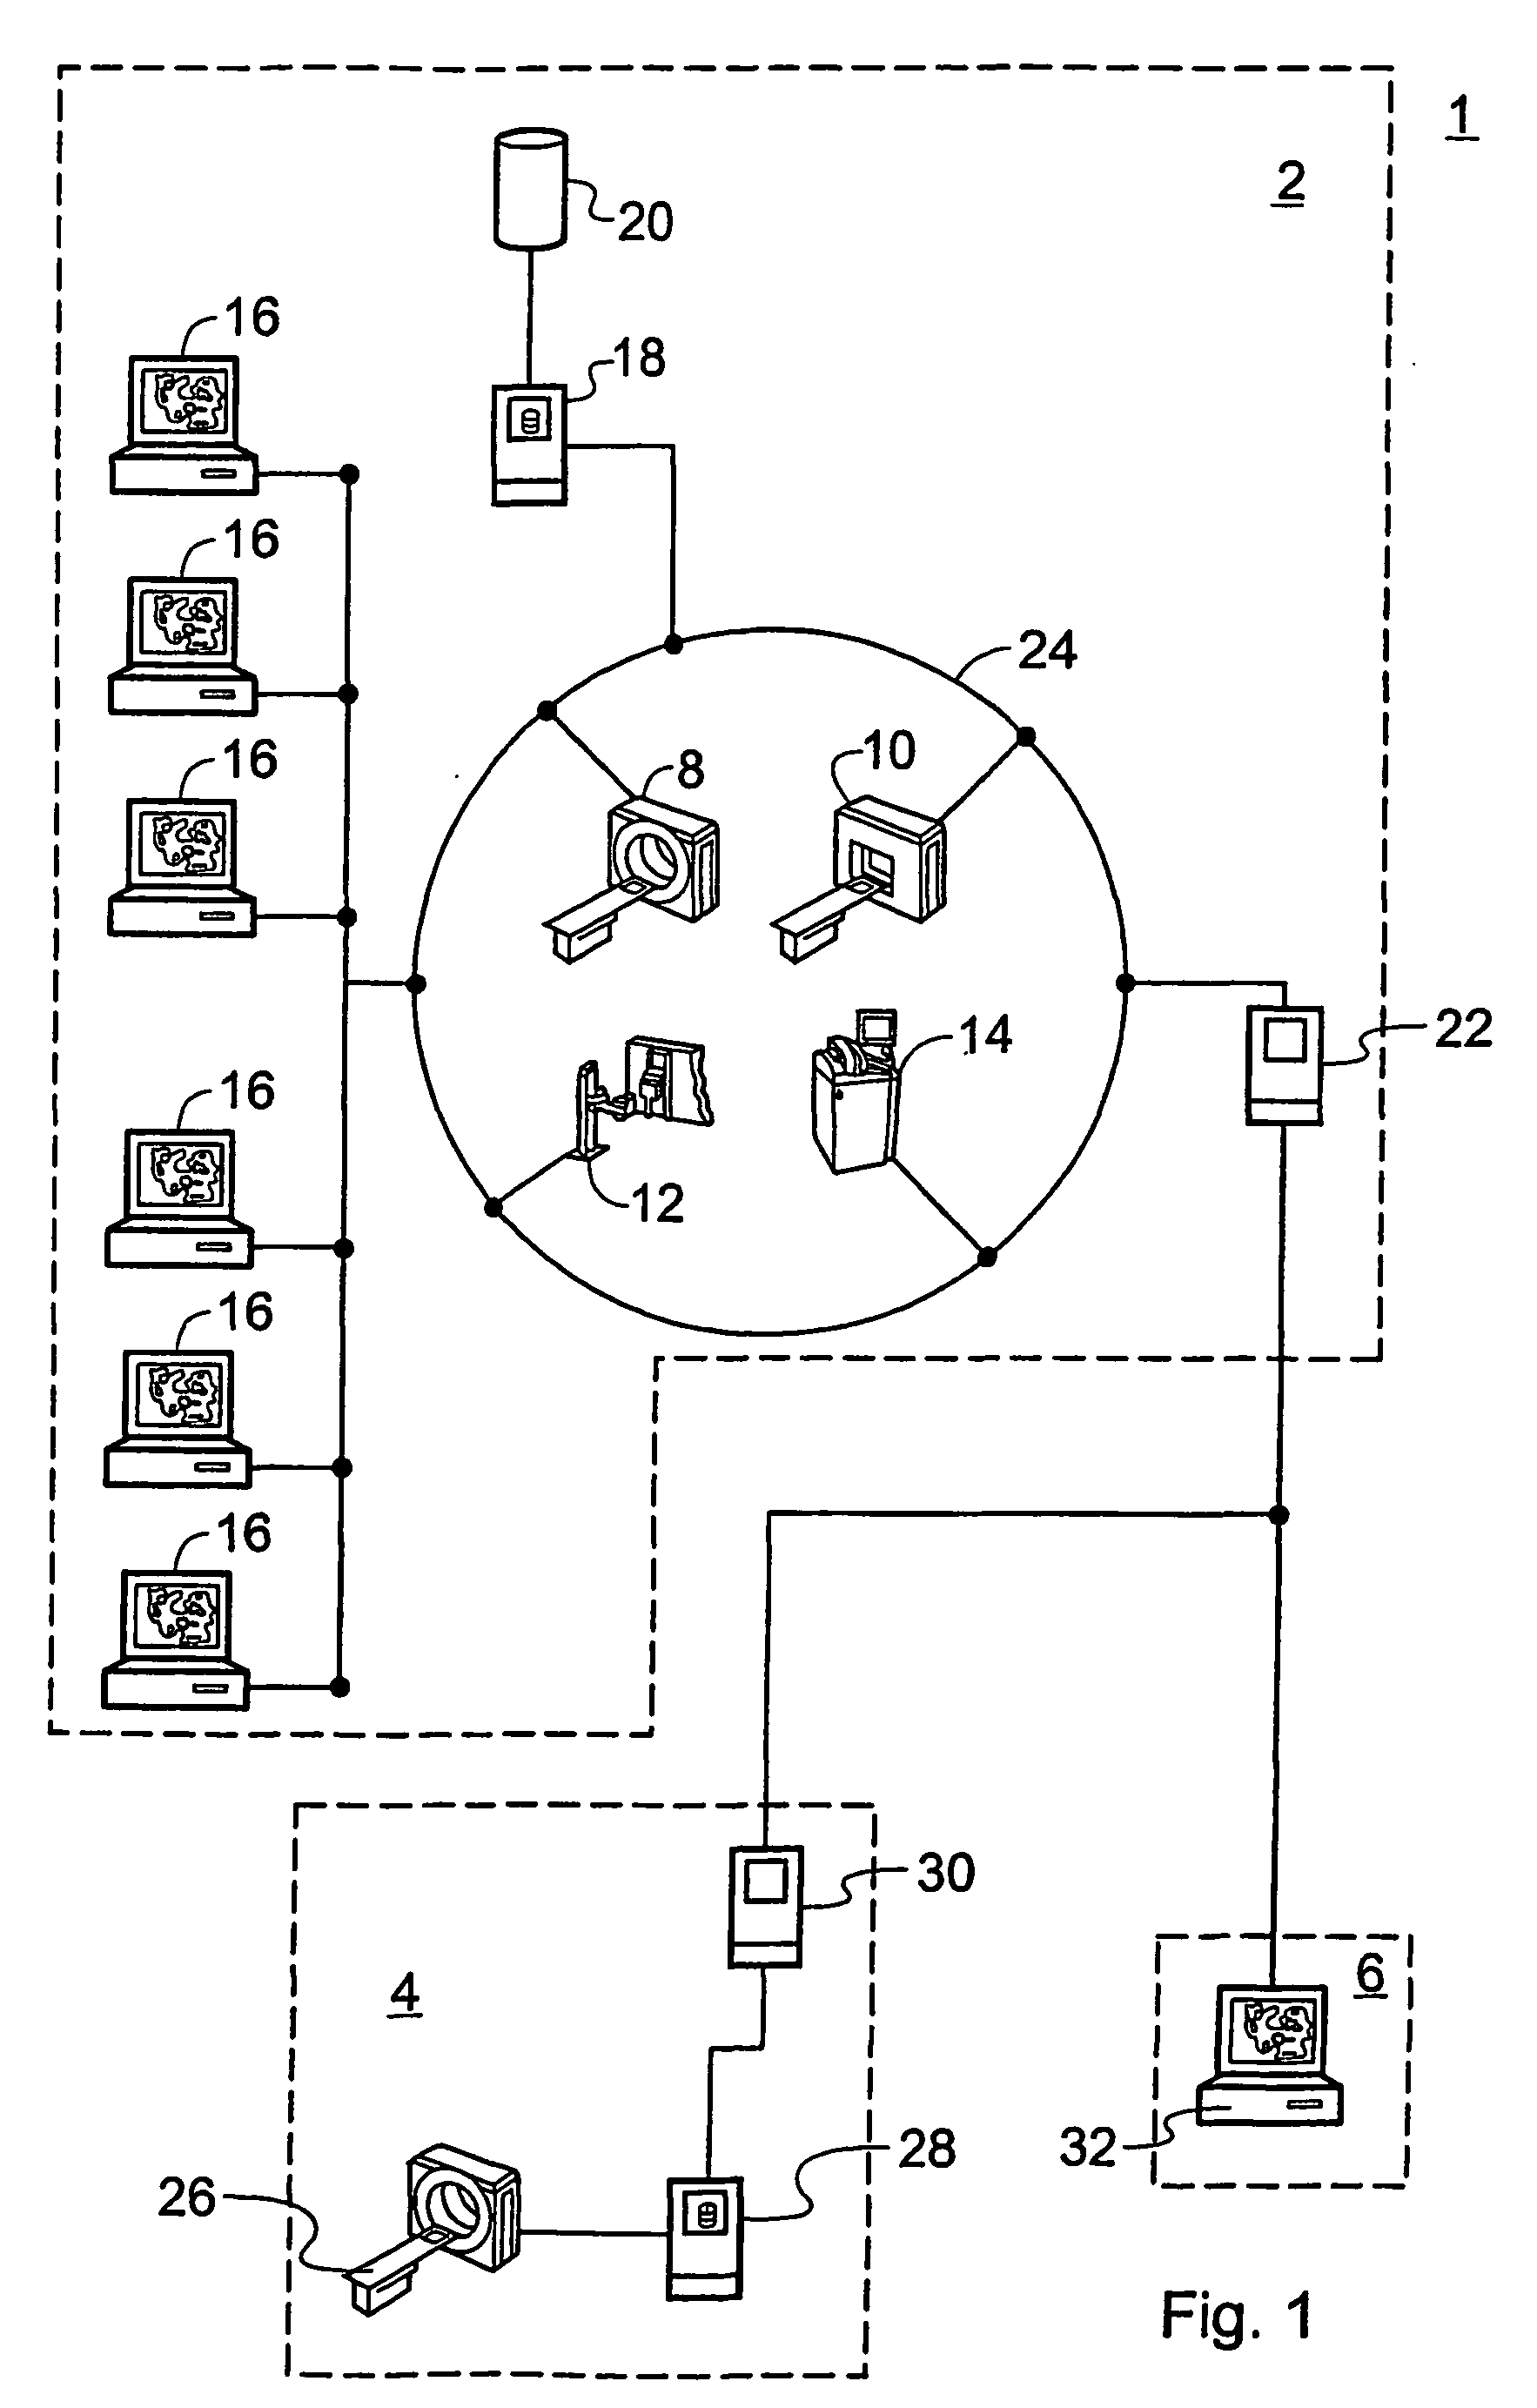 Handling of image data created by manipulation of image data sets